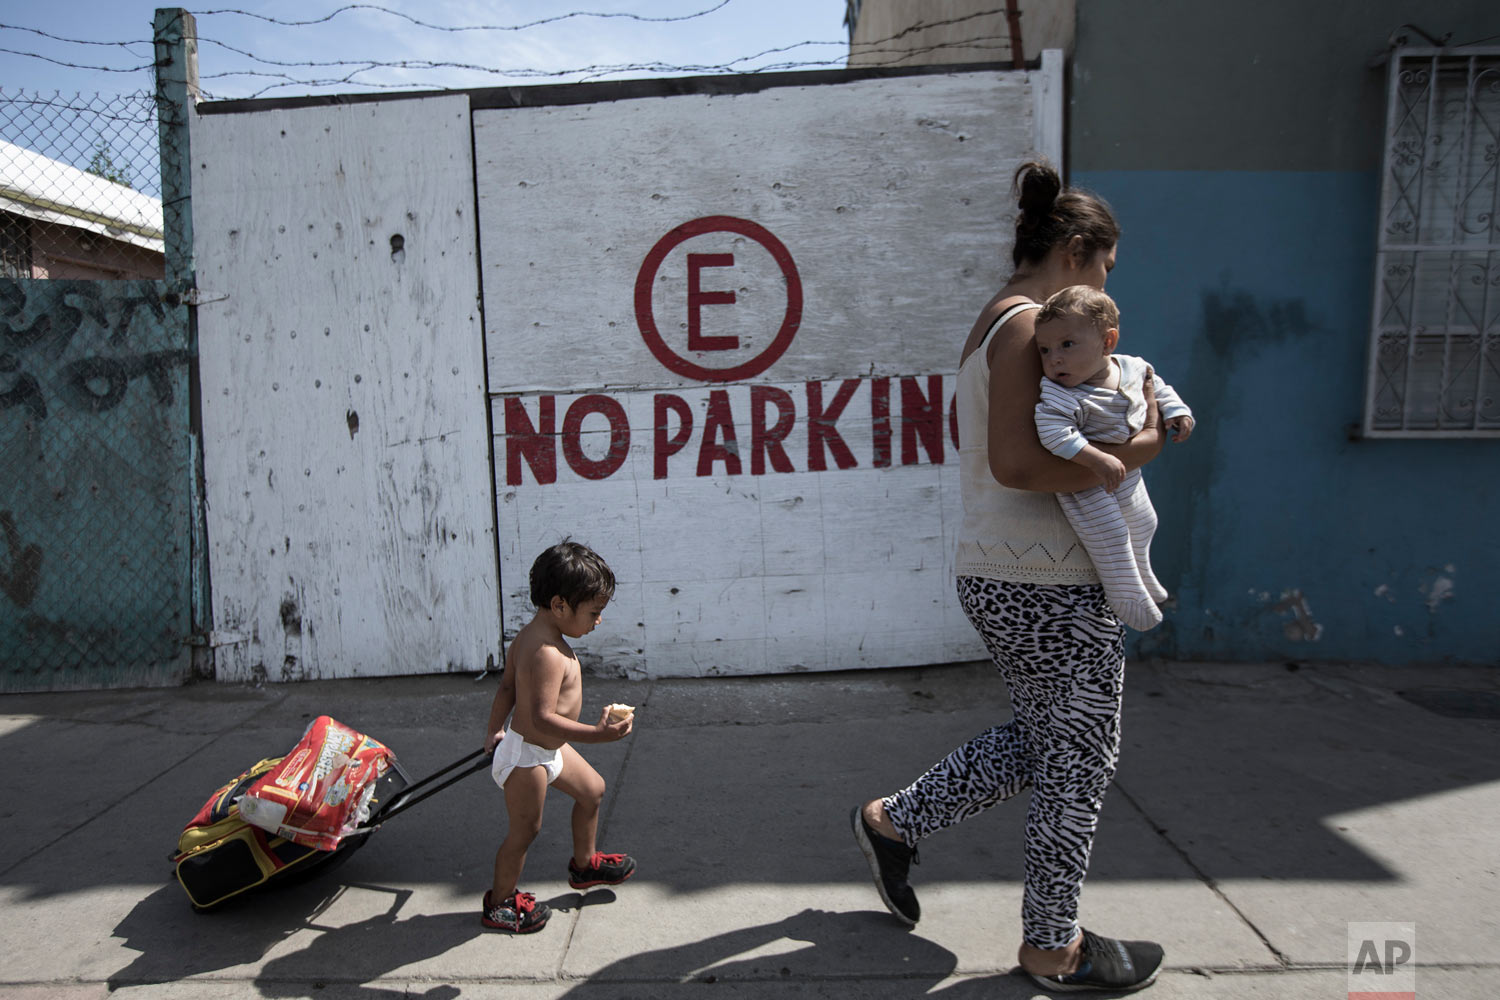  A Honduran migrant who is traveling with a caravan of Central American migrants walks with her two children to a shelter in Tijuana, Mexico, Wednesday, April 25, 2018. The caravan of mainly Central American migrants are planning to request asylum, e